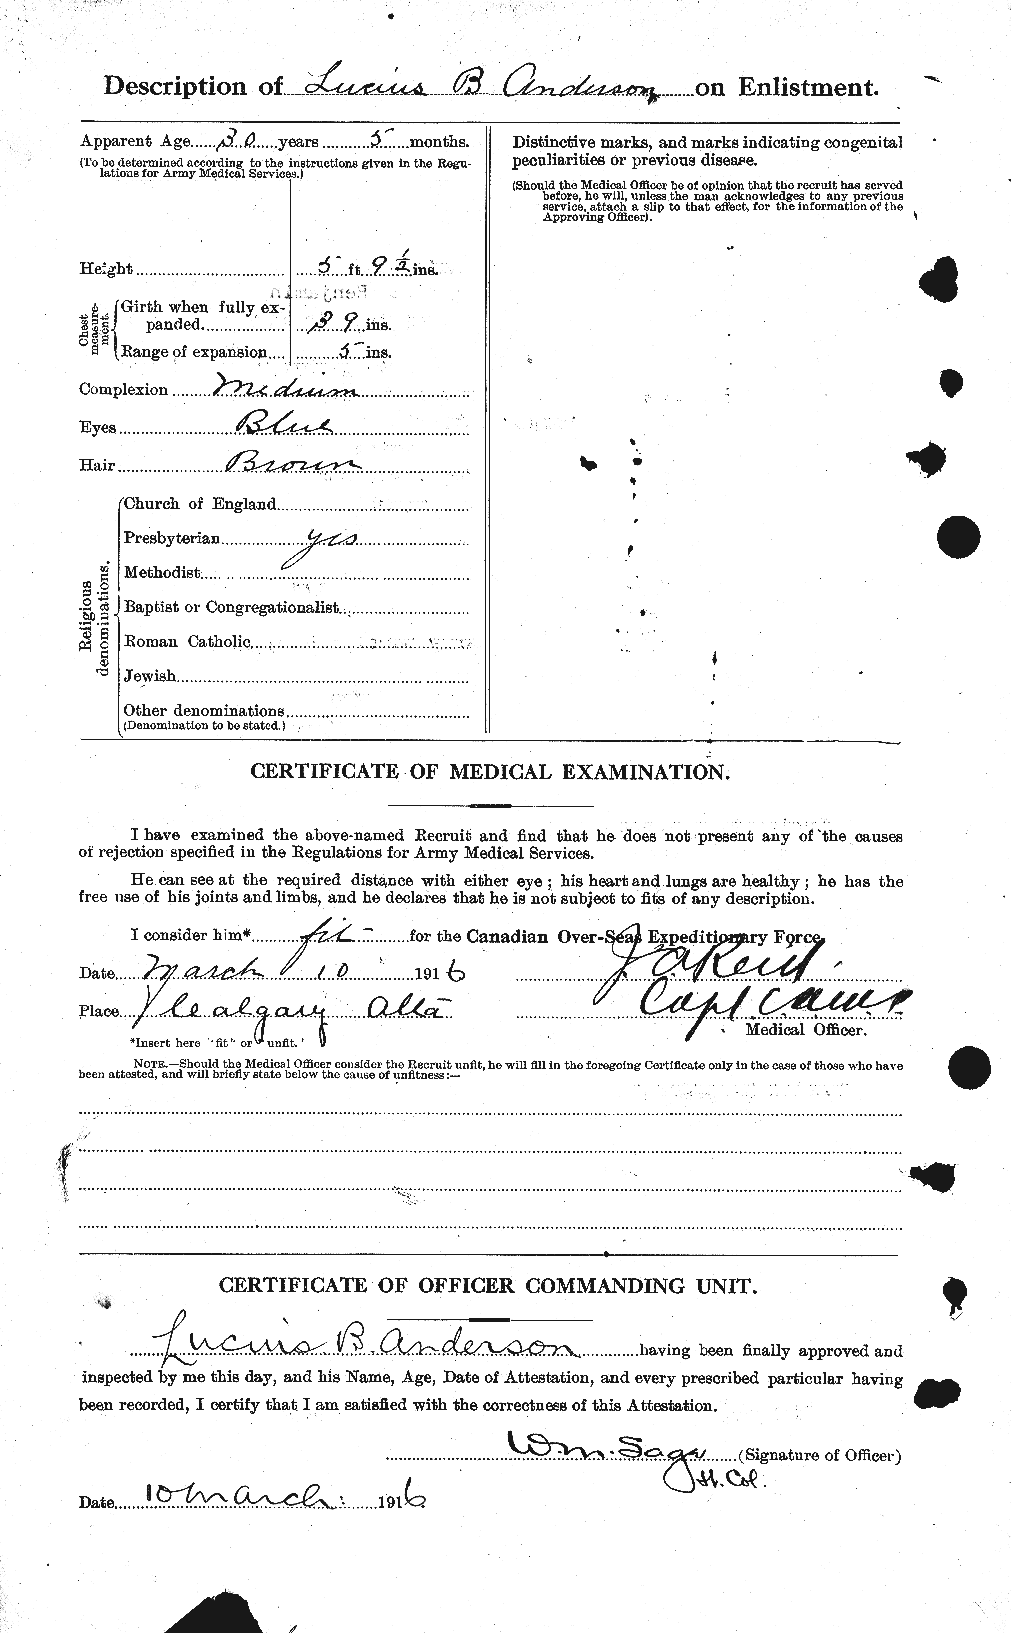 Personnel Records of the First World War - CEF 207492b